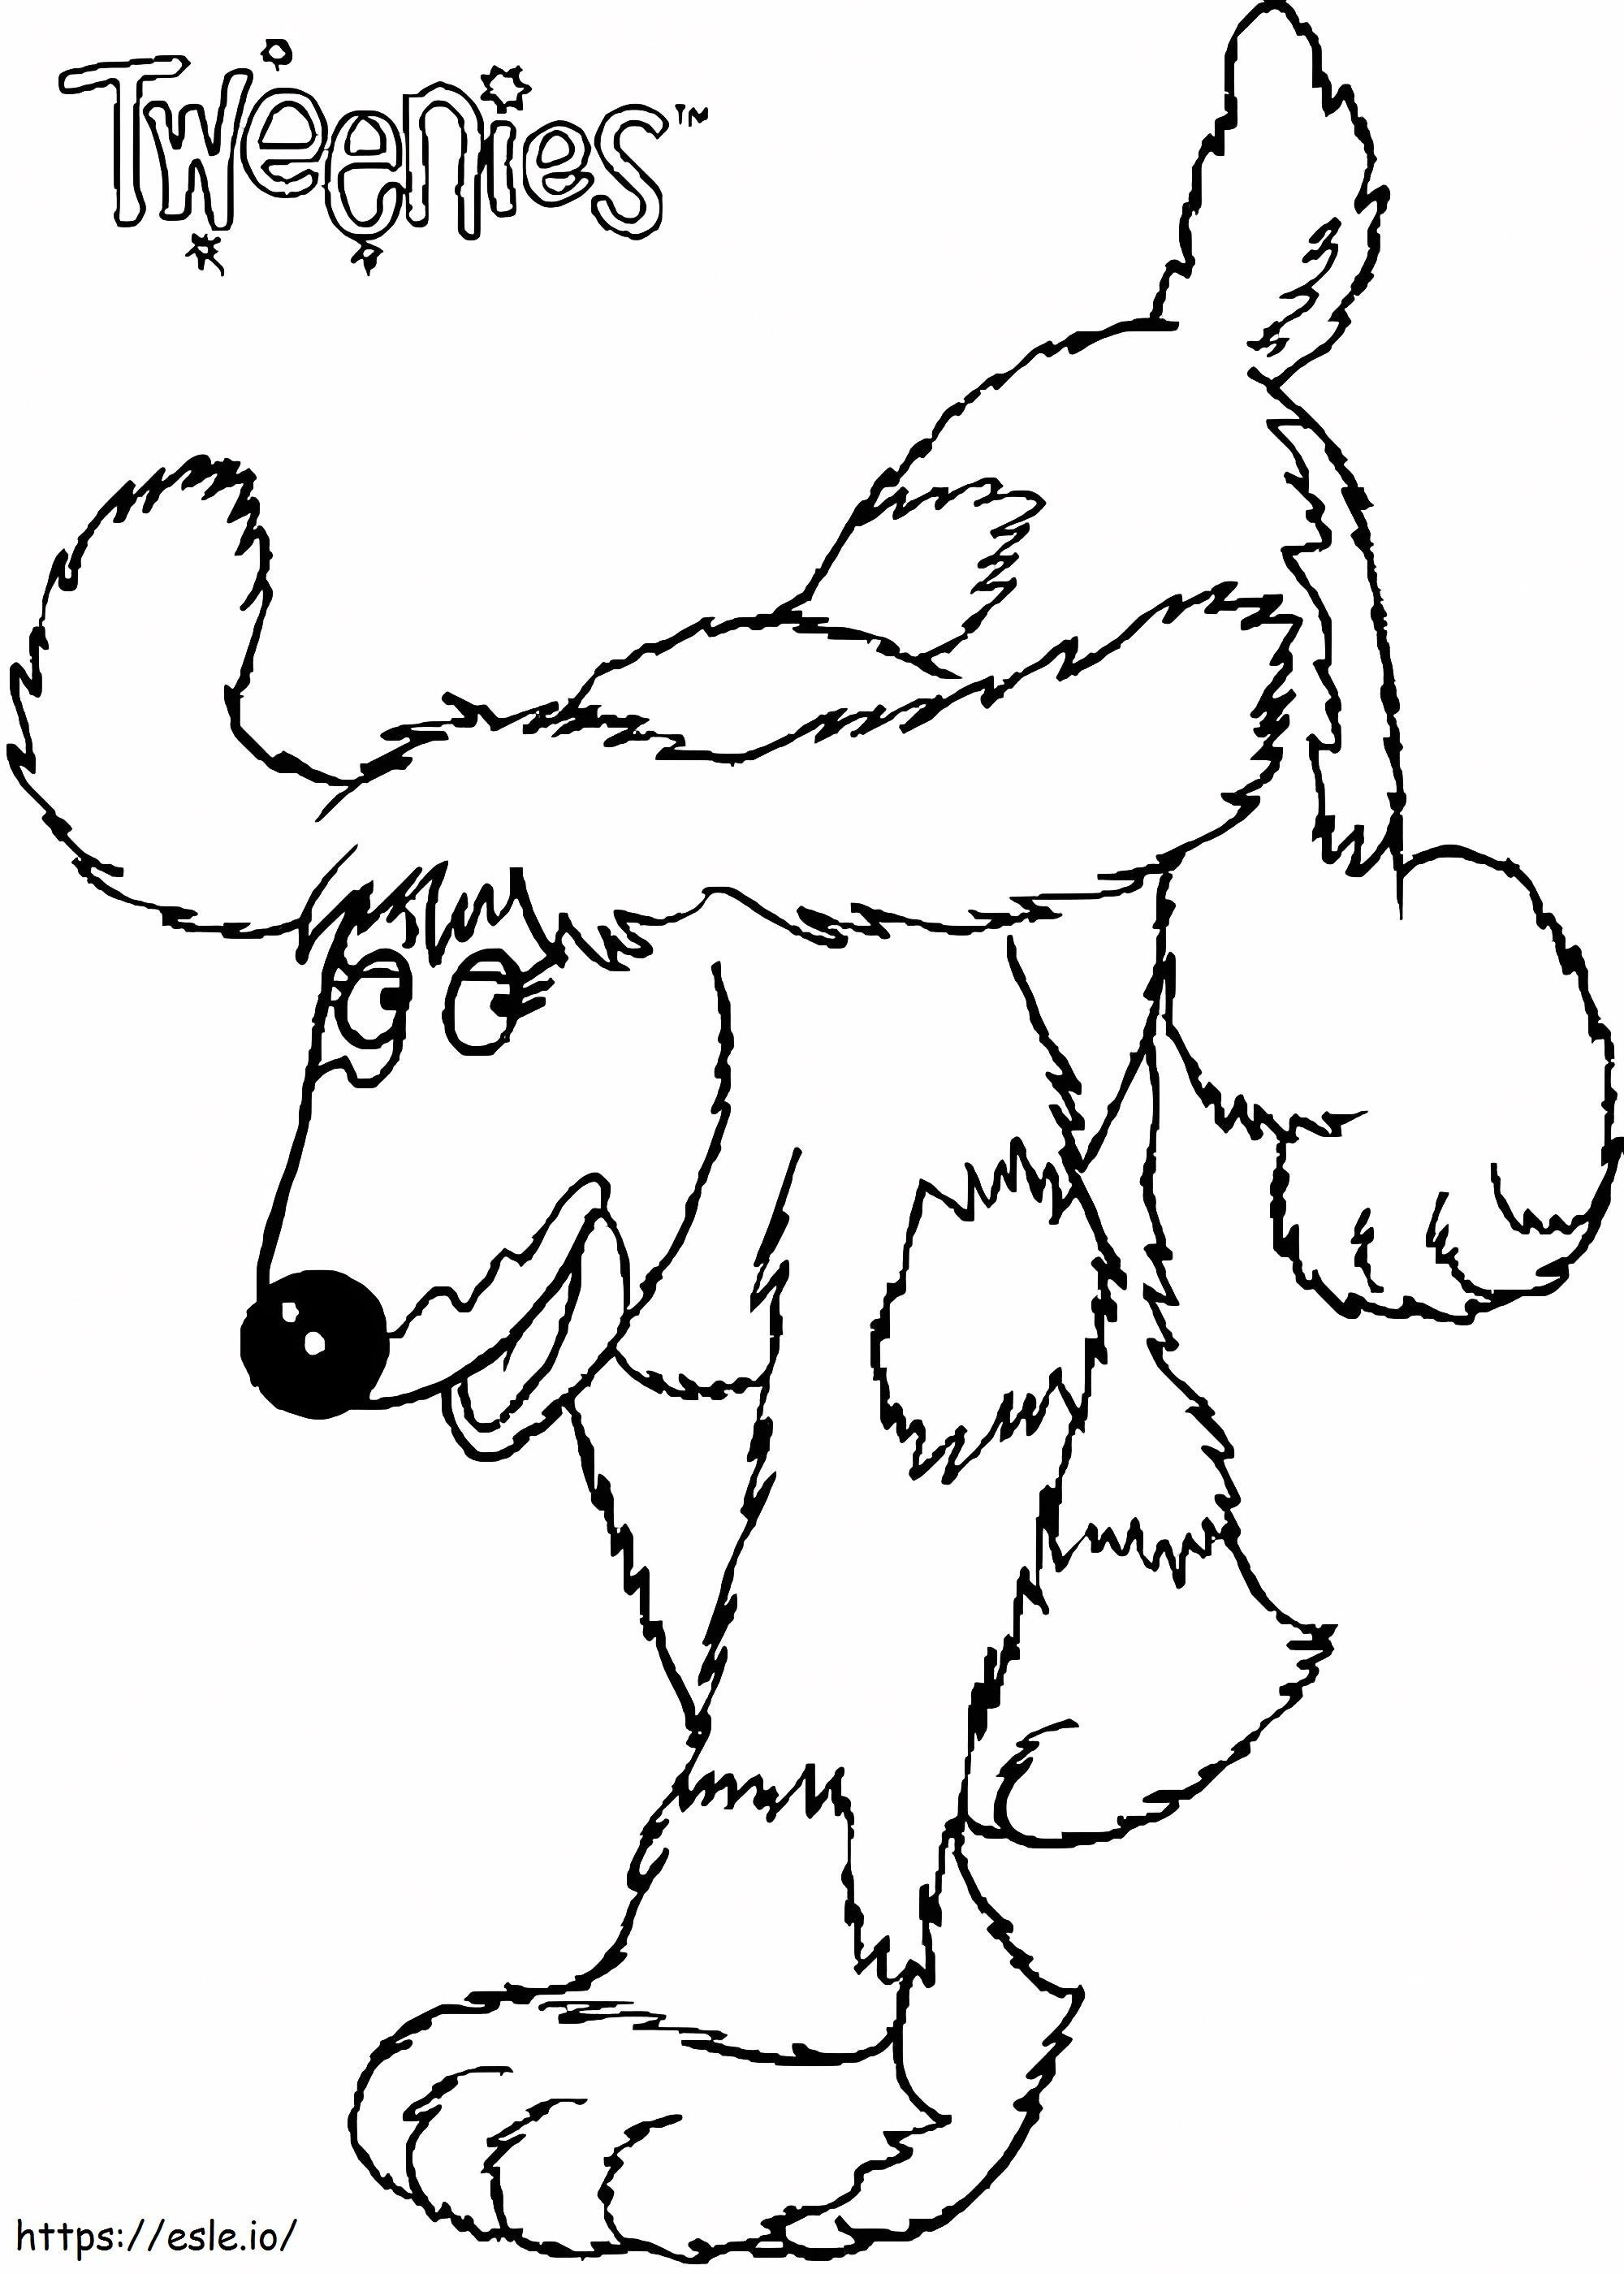 Funny Doodles coloring page